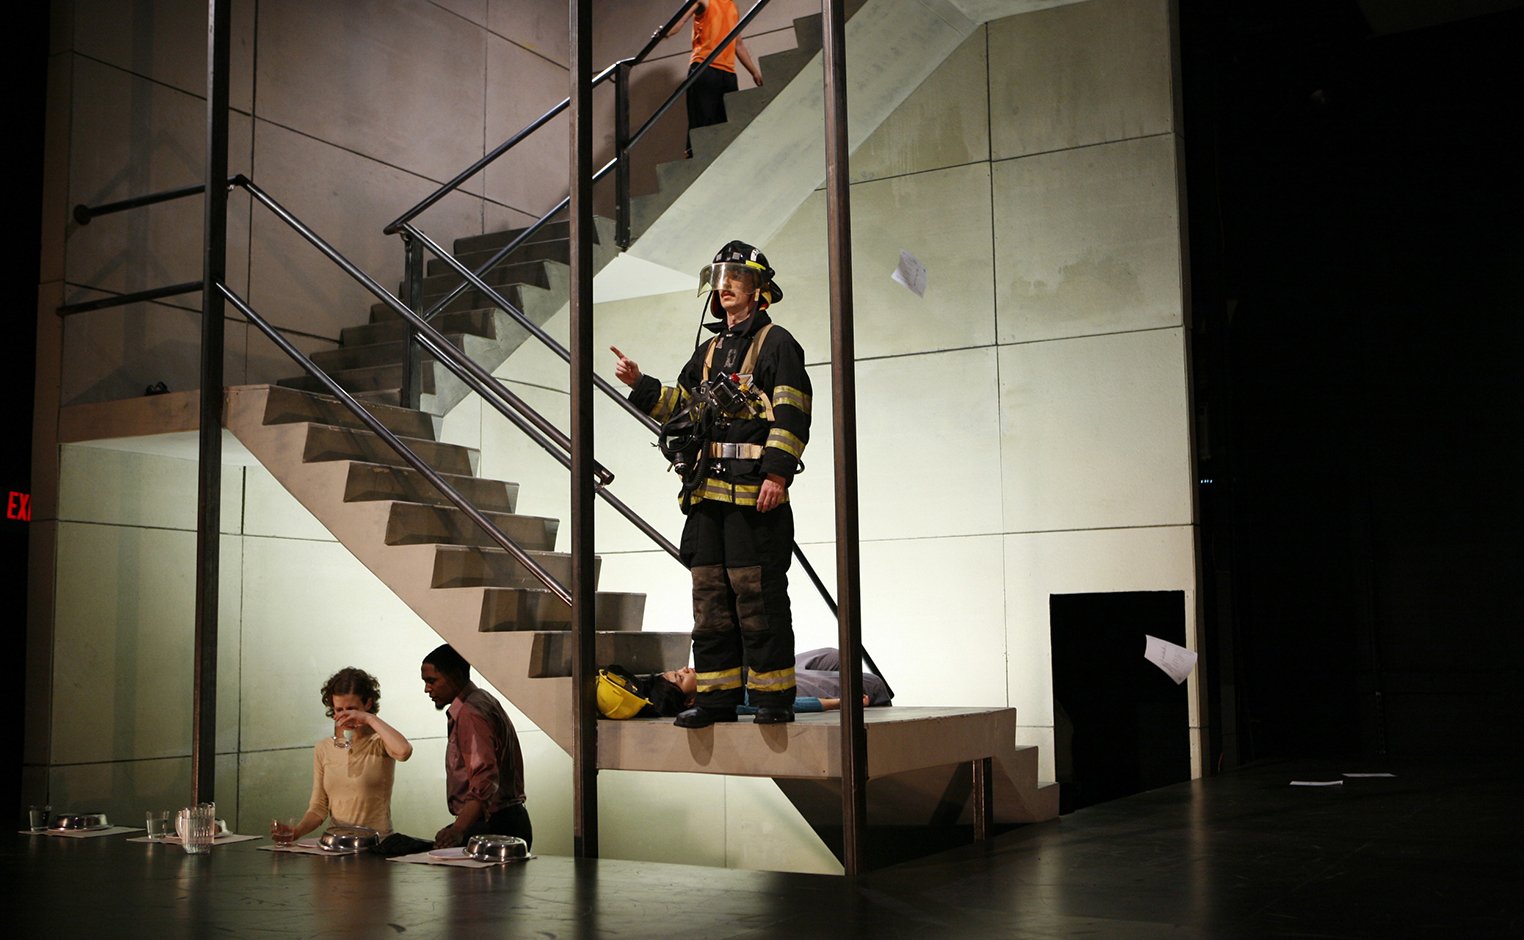 Person dressed as firefighter stands in stairwell